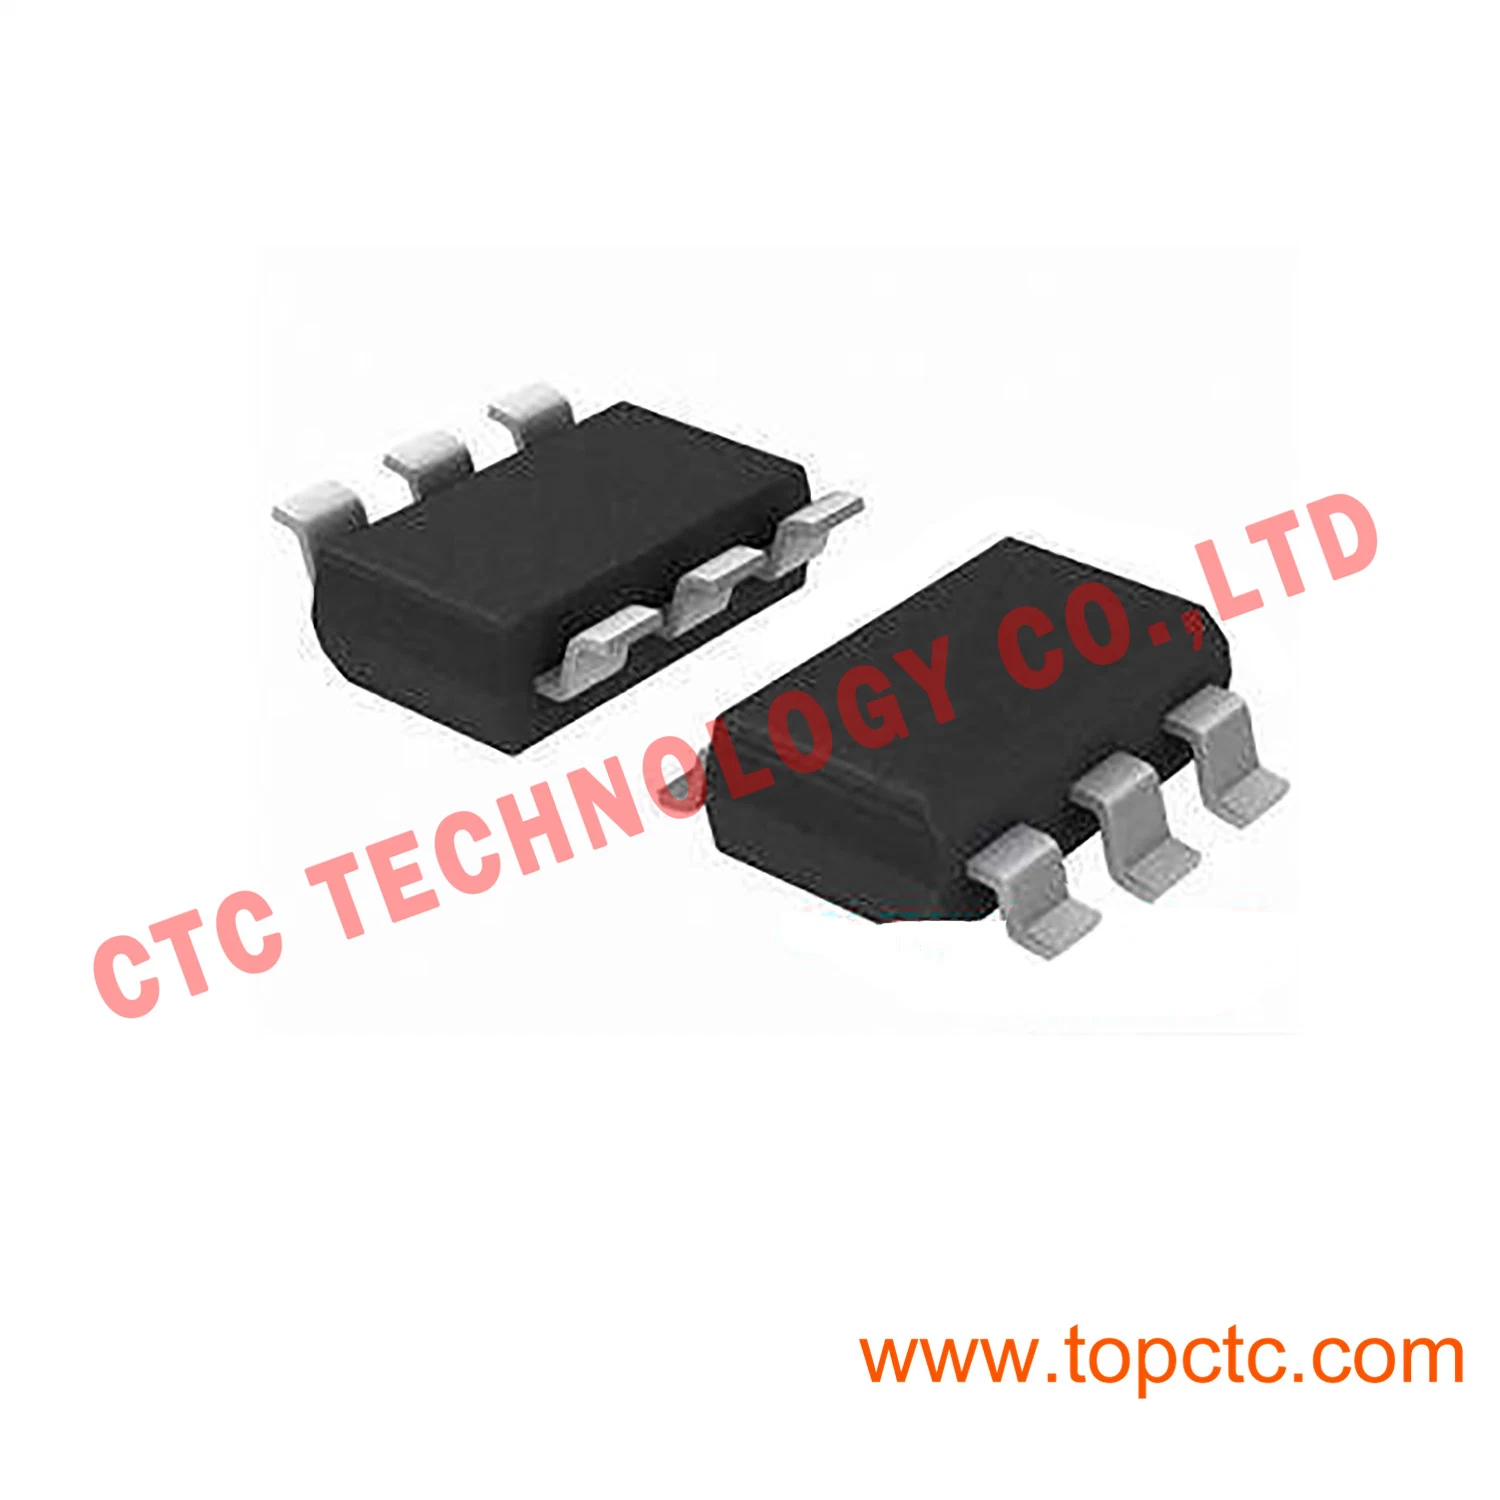 IP2161 USB electronic component automatically detection IC